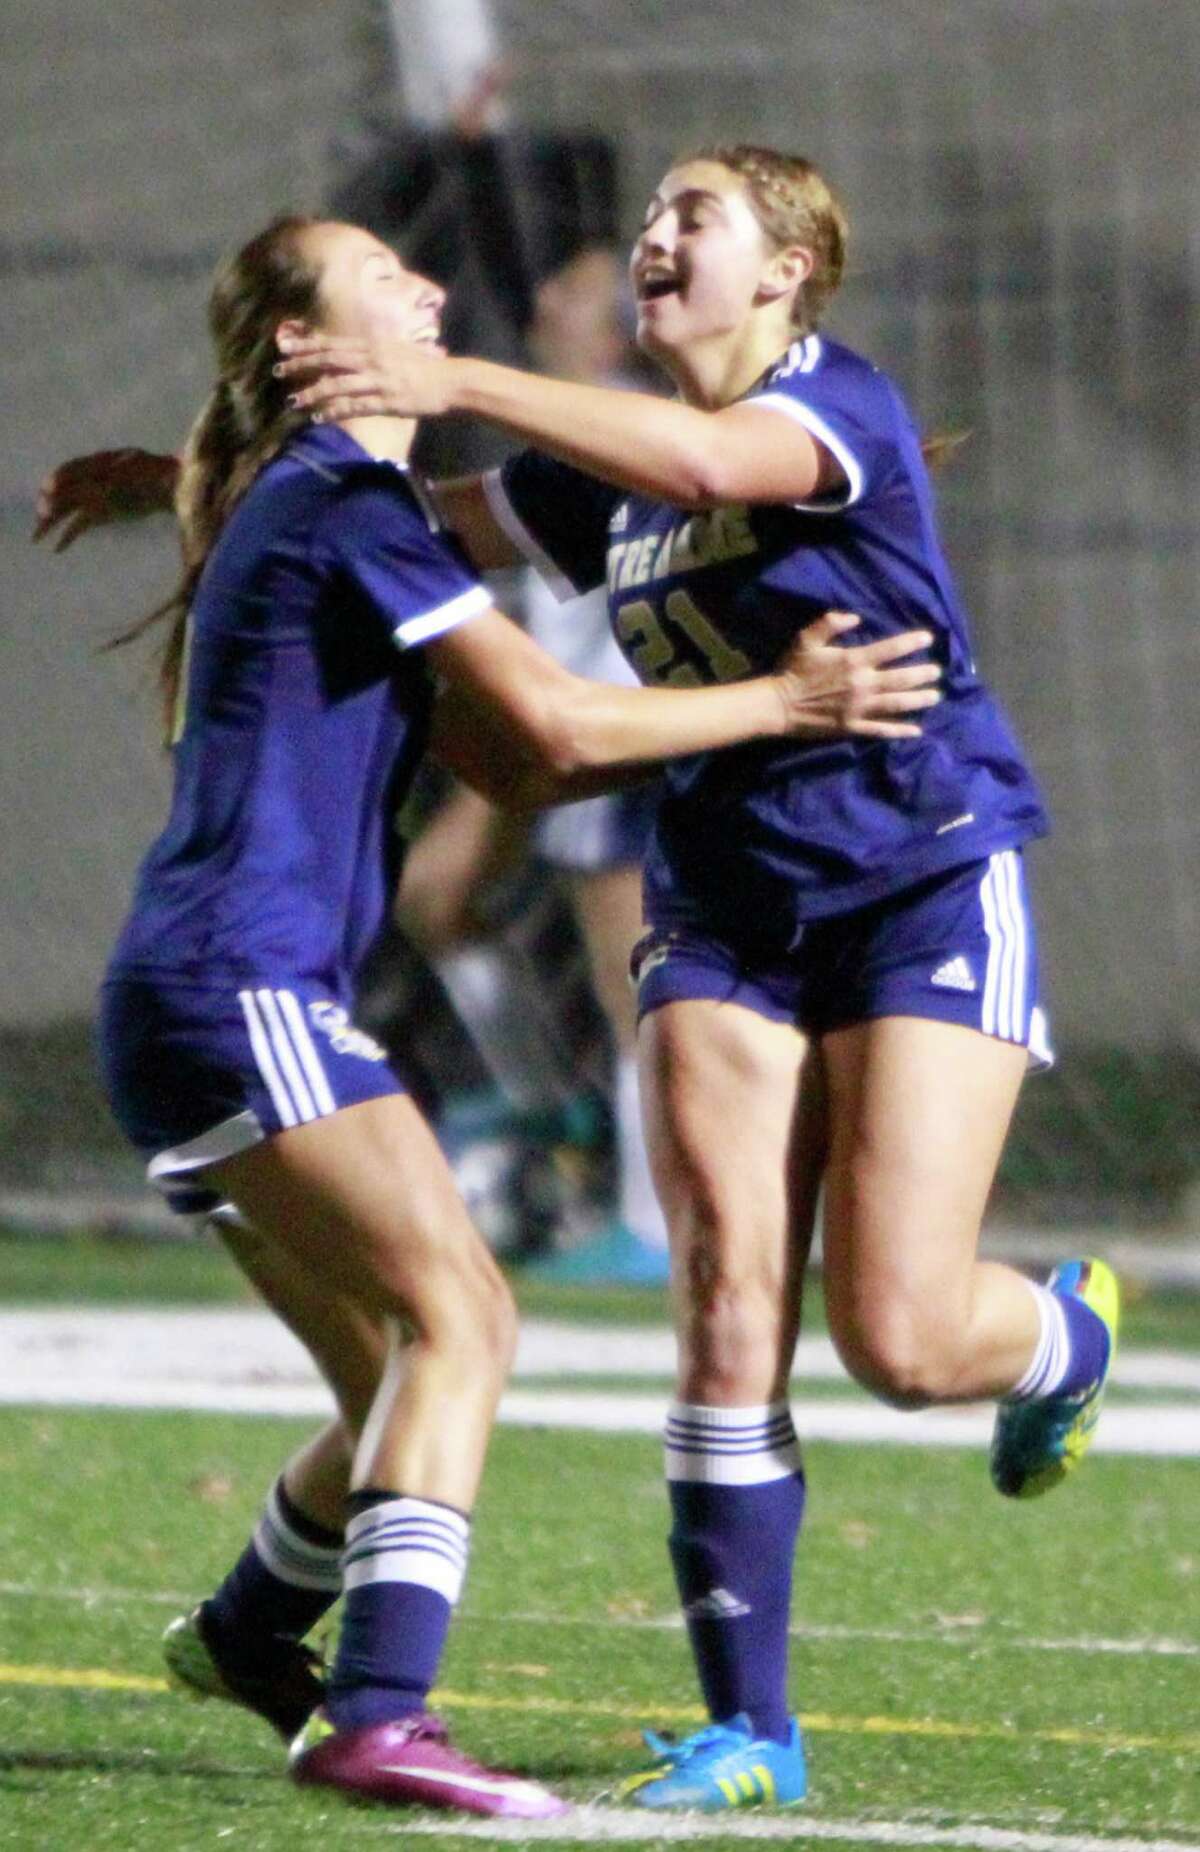 Notre Dame-Fairfield's Samantha LaValle, at right, celebrates her first half goal against Bolton with teammate Katie Ciufo in a CIAC Class S semi final girls soccer game on Nov. 16, 2015 in Meriden.